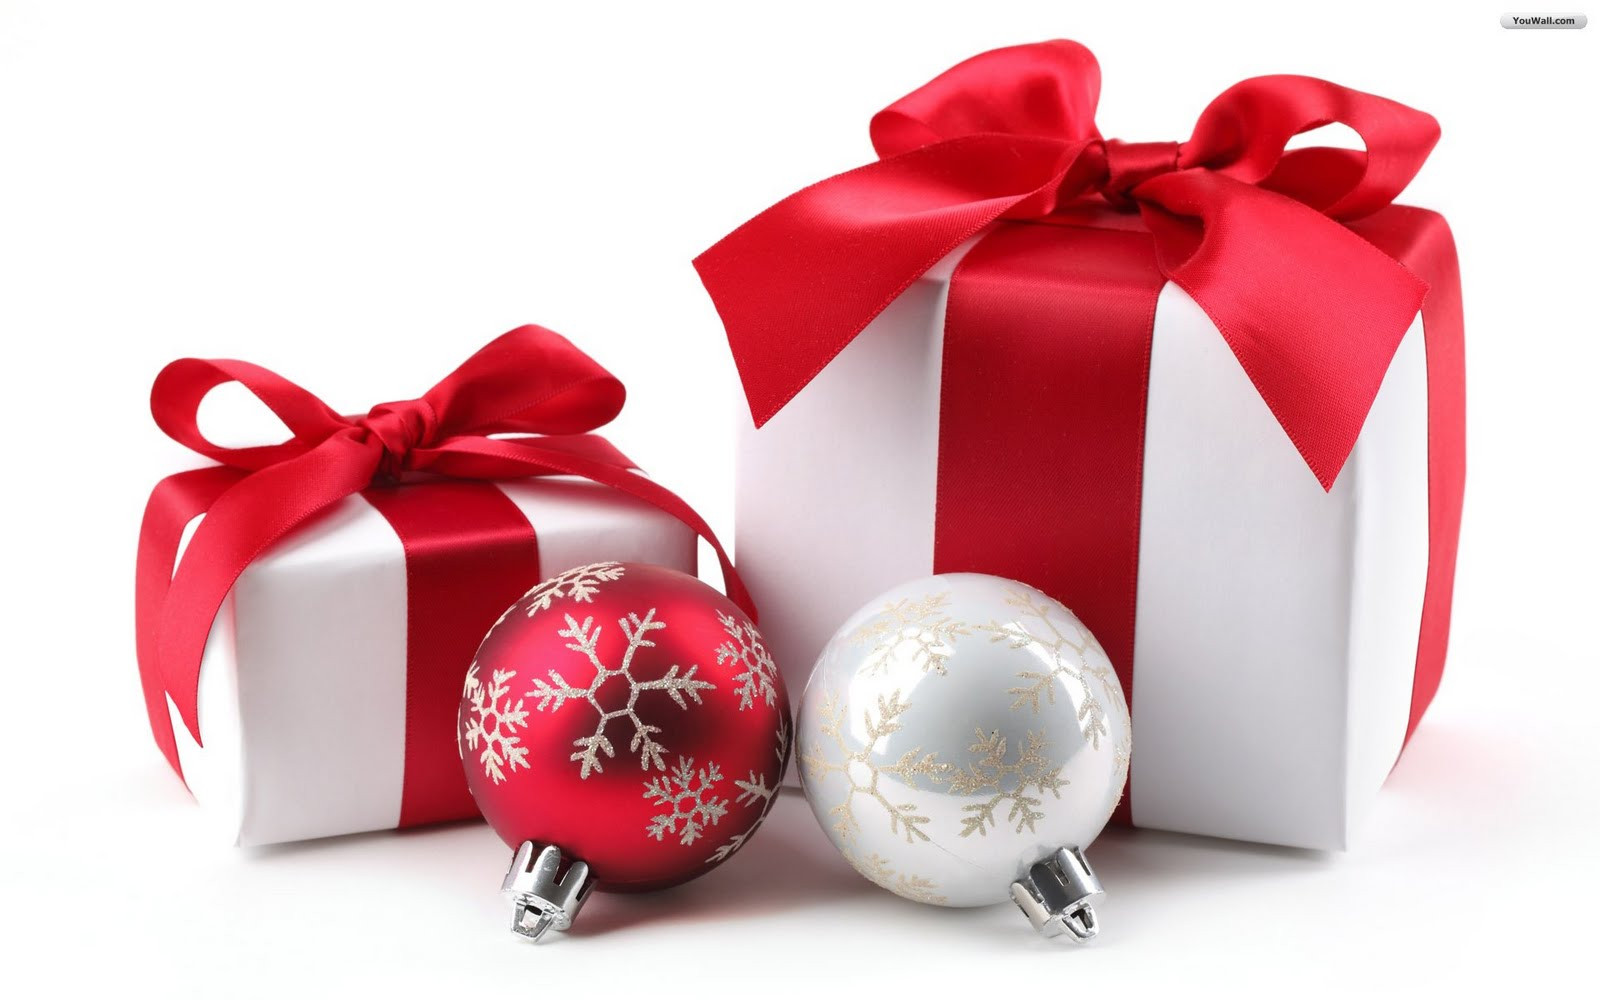 Christmas Gift Background
 Wallpapers Background Christmas Gifts Wallpapers